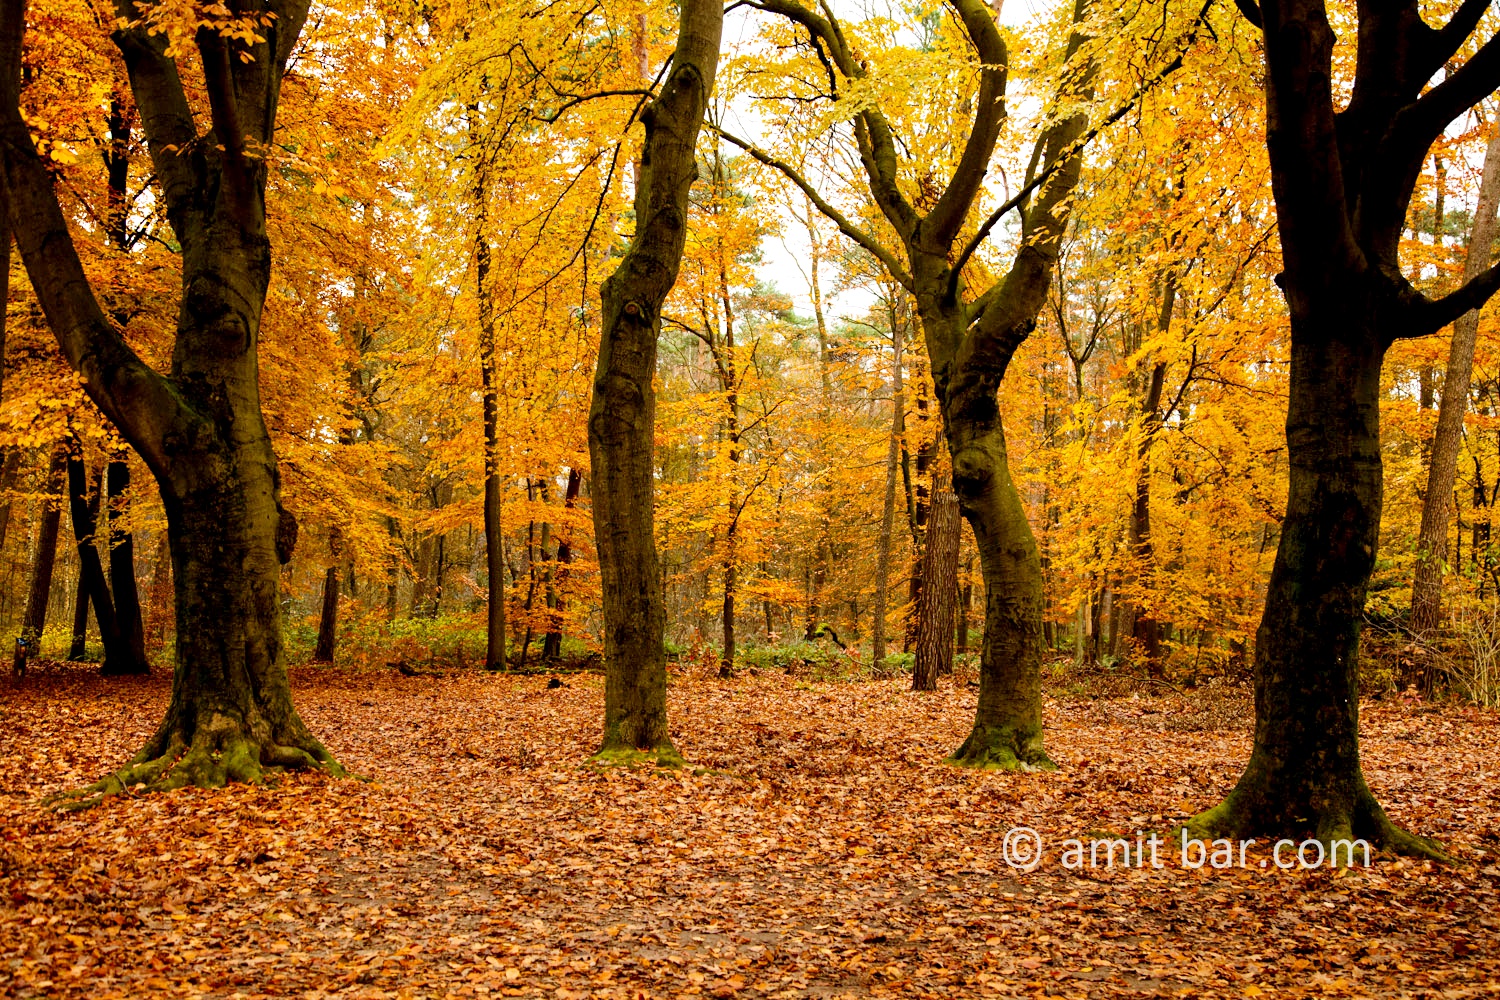 Beech trees in the autumn. Doetinchem, The Netherlands